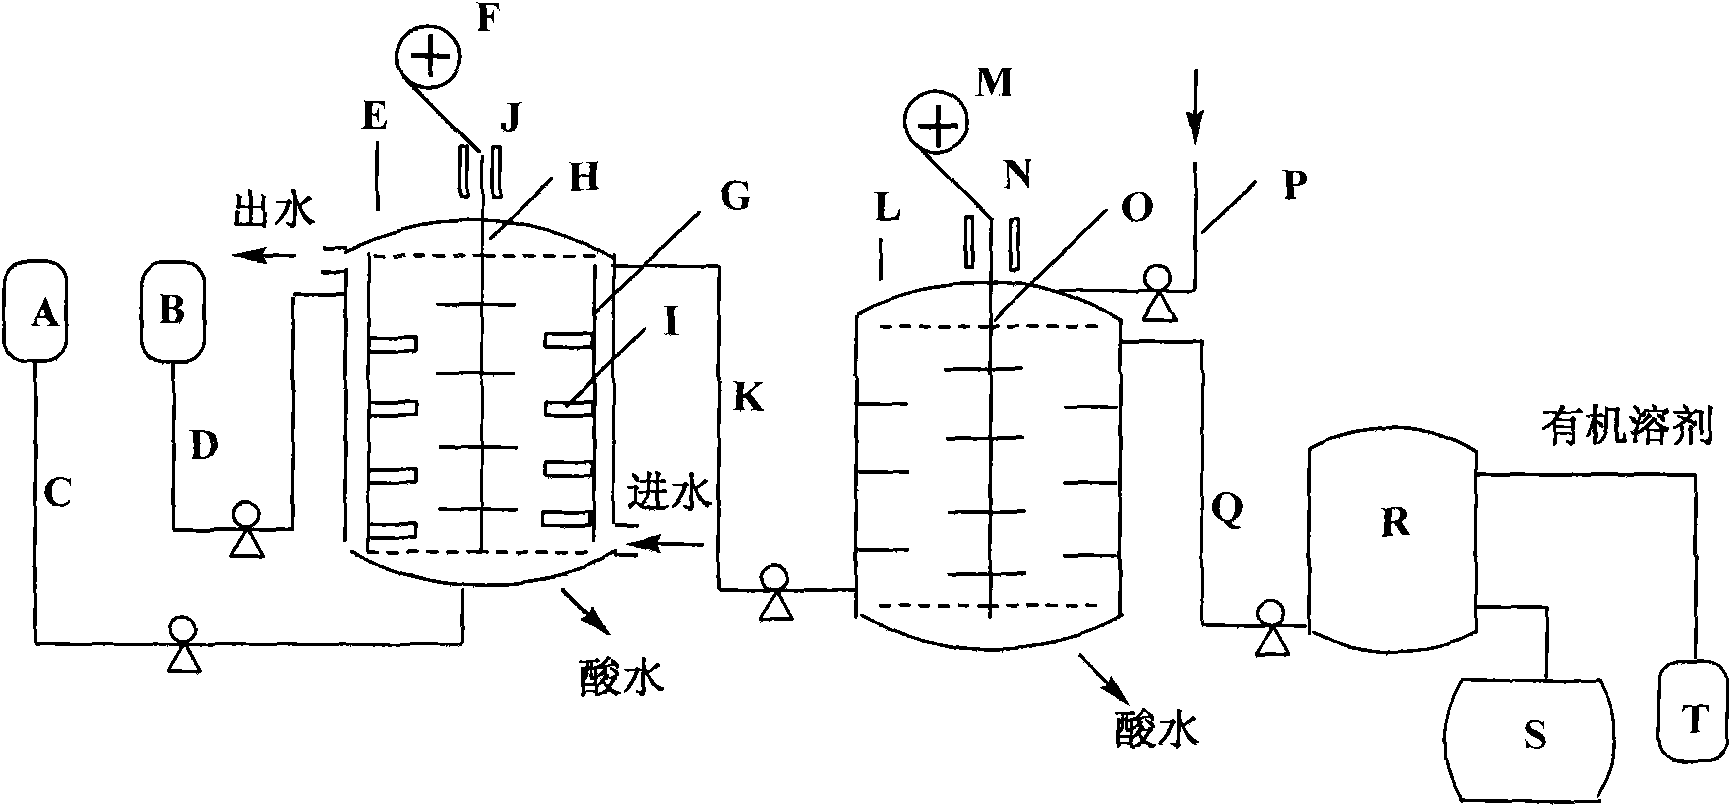 Alkyl silicone continuous production system and production method